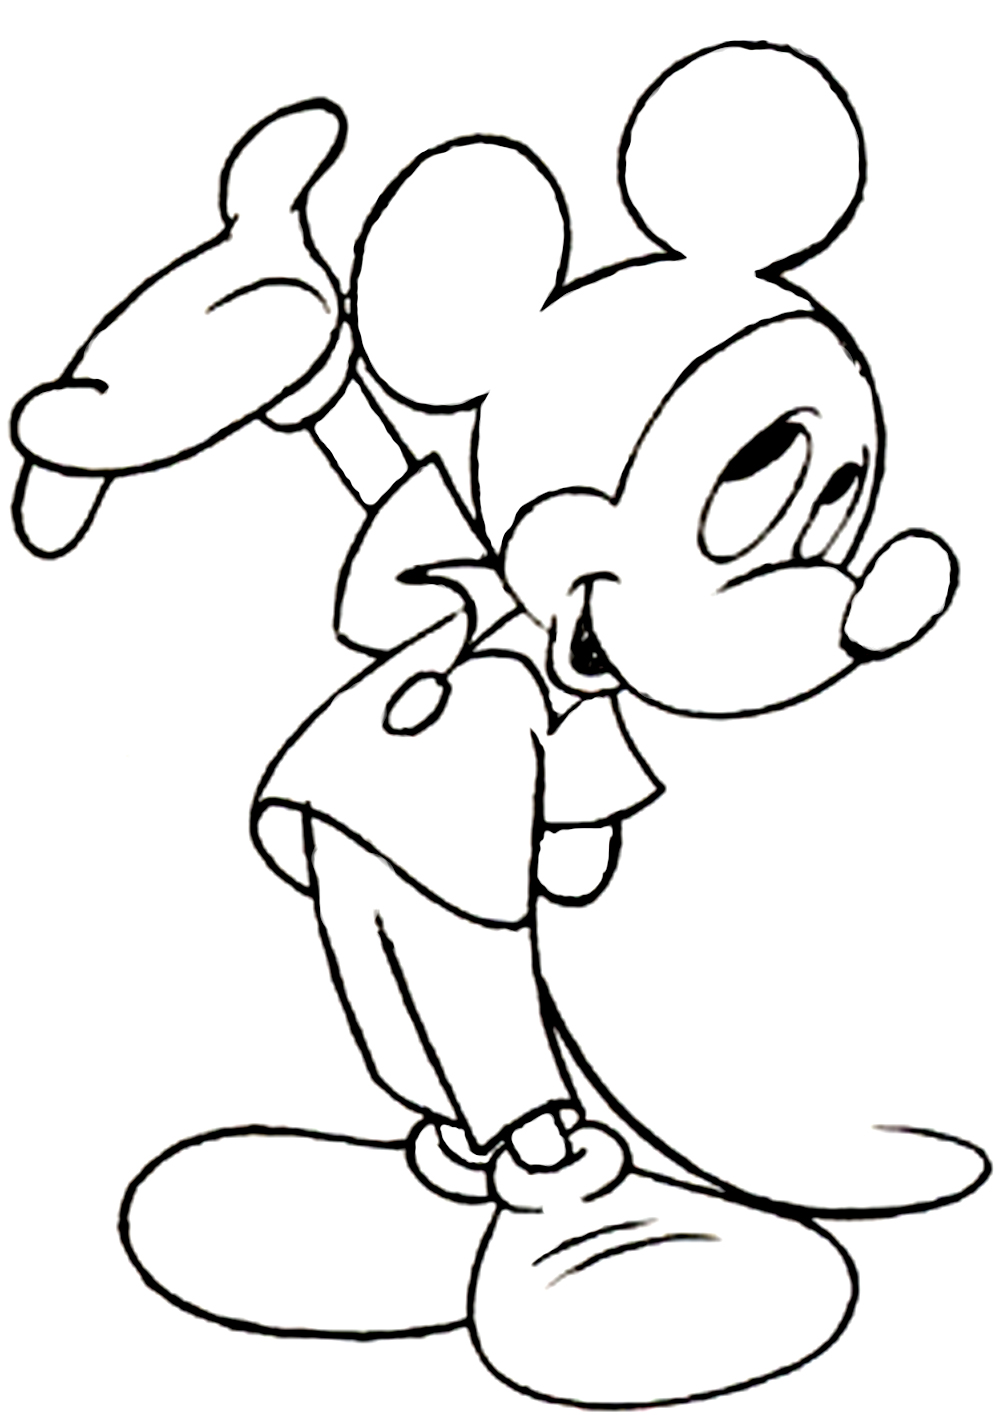 Mickey mouse printable coloring pages